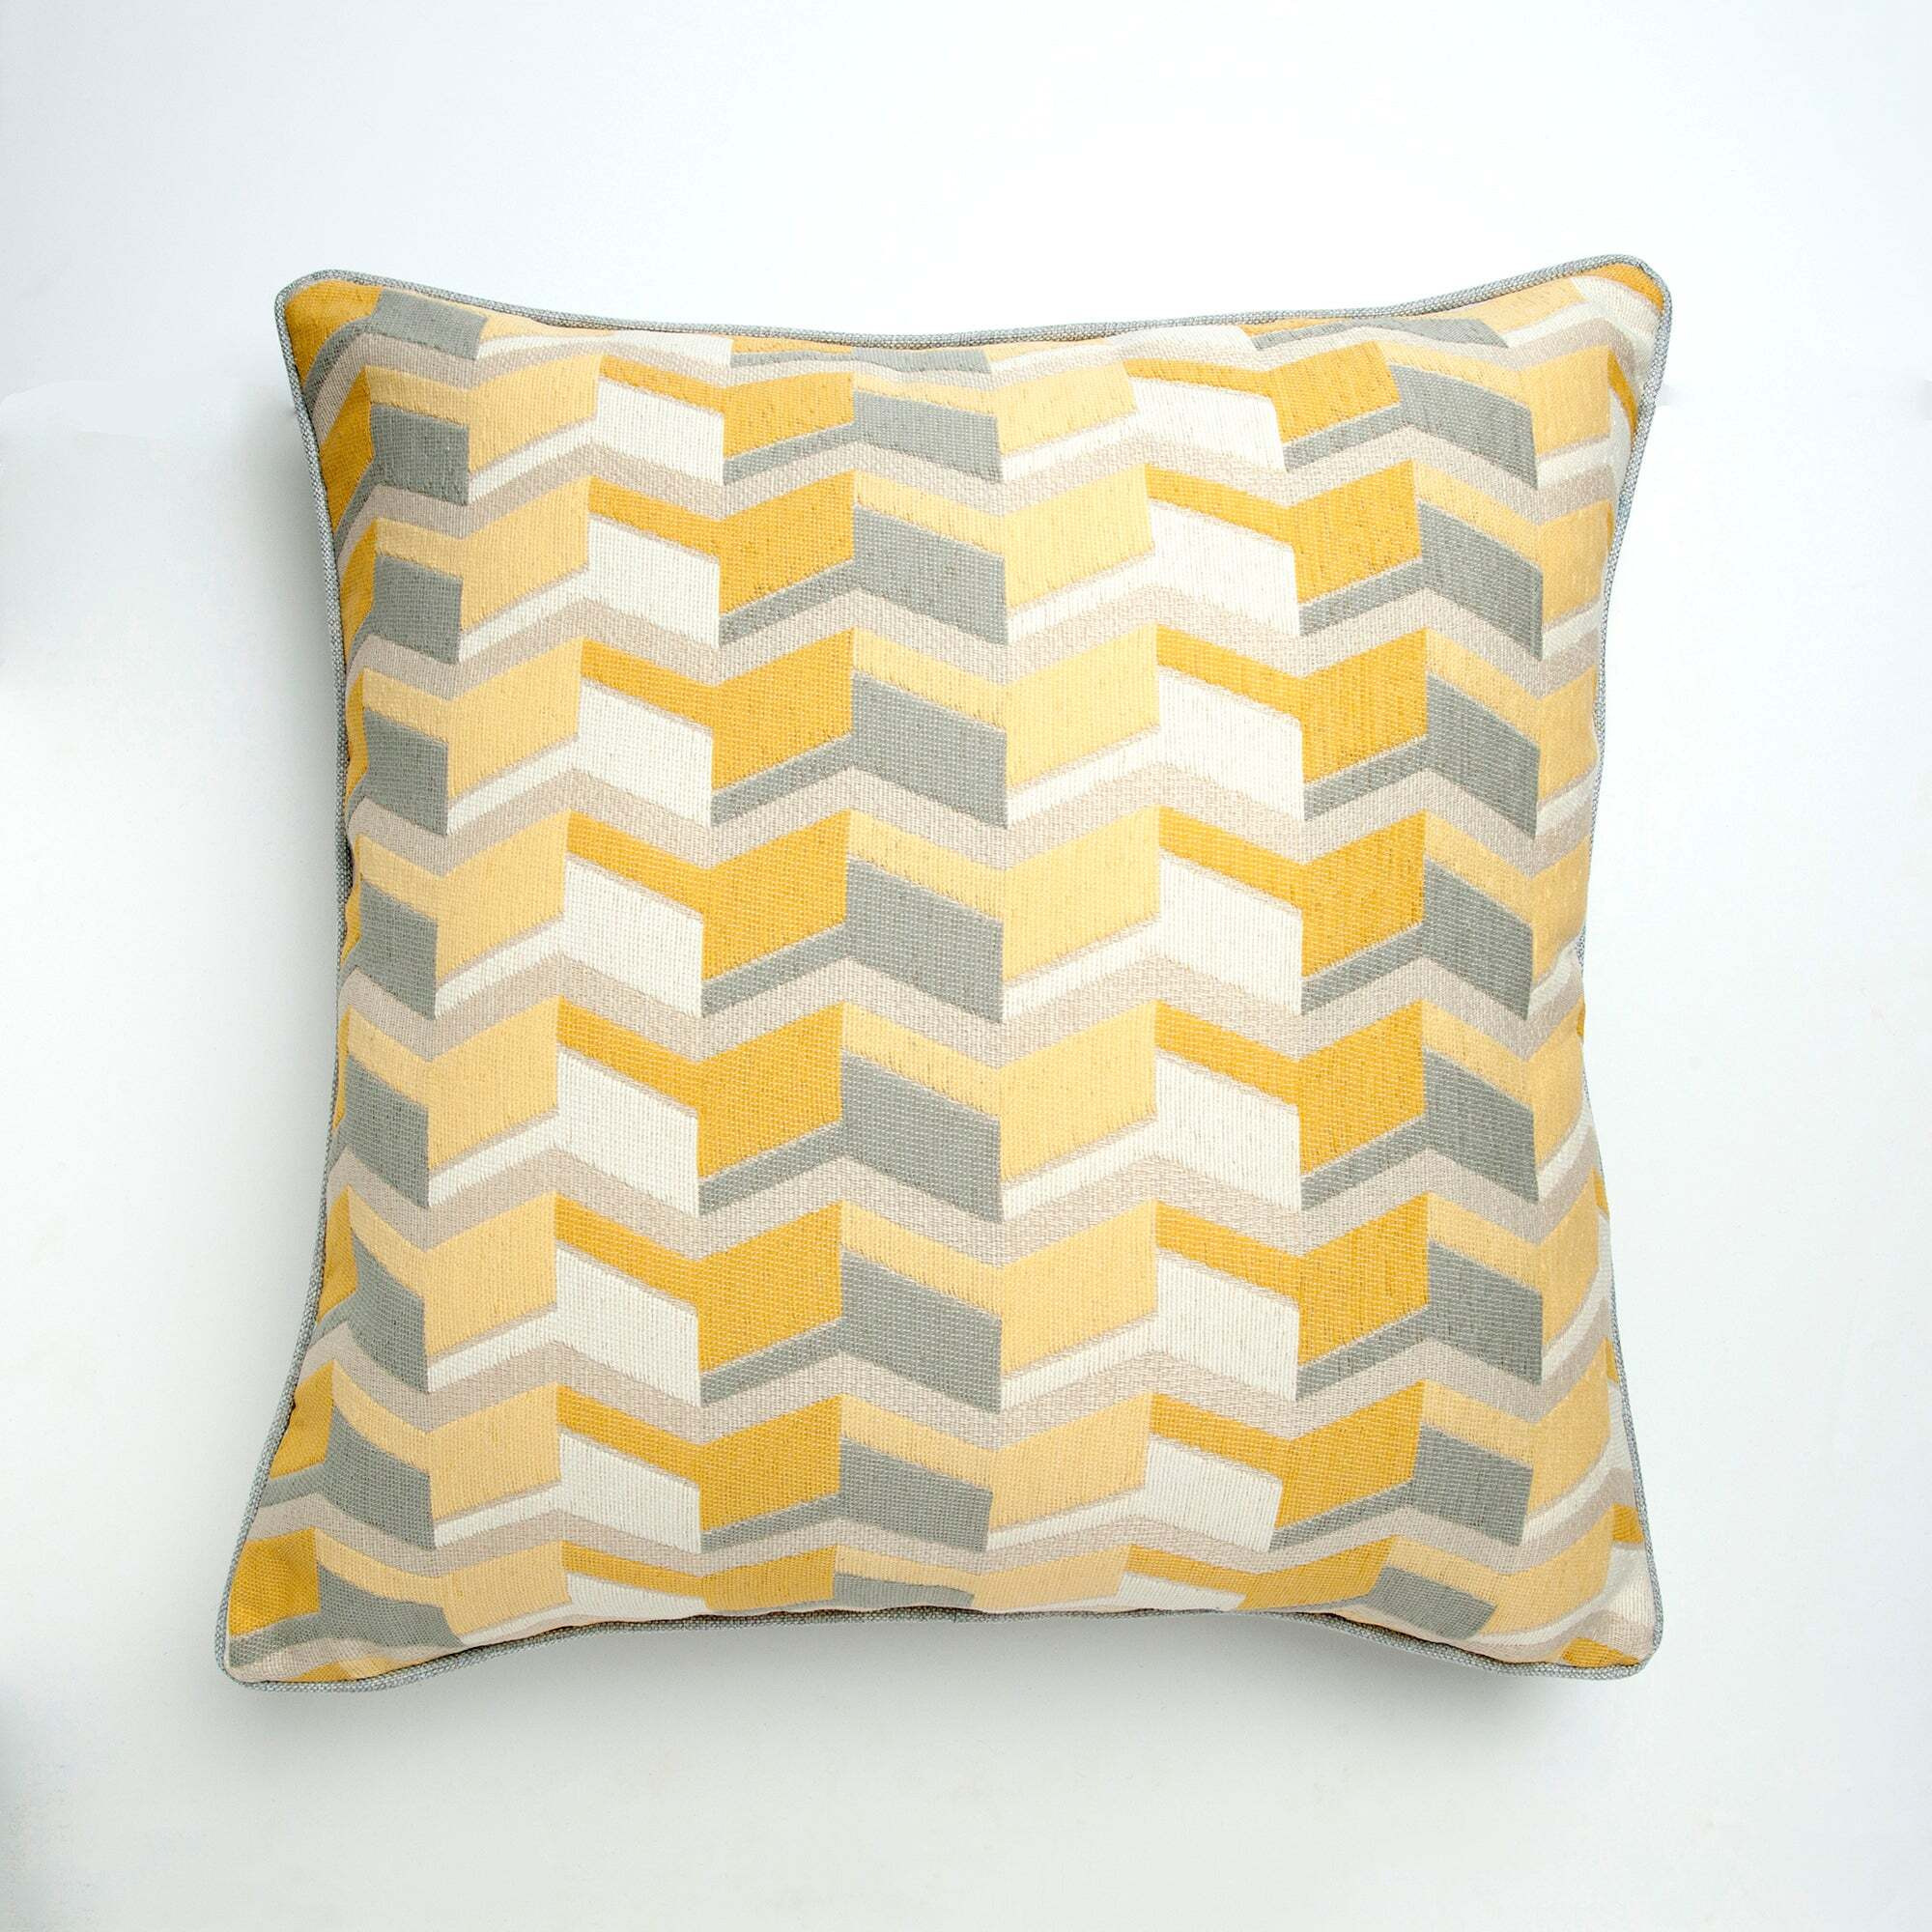 Sonny Cushion Cover Yellow, Grey and White